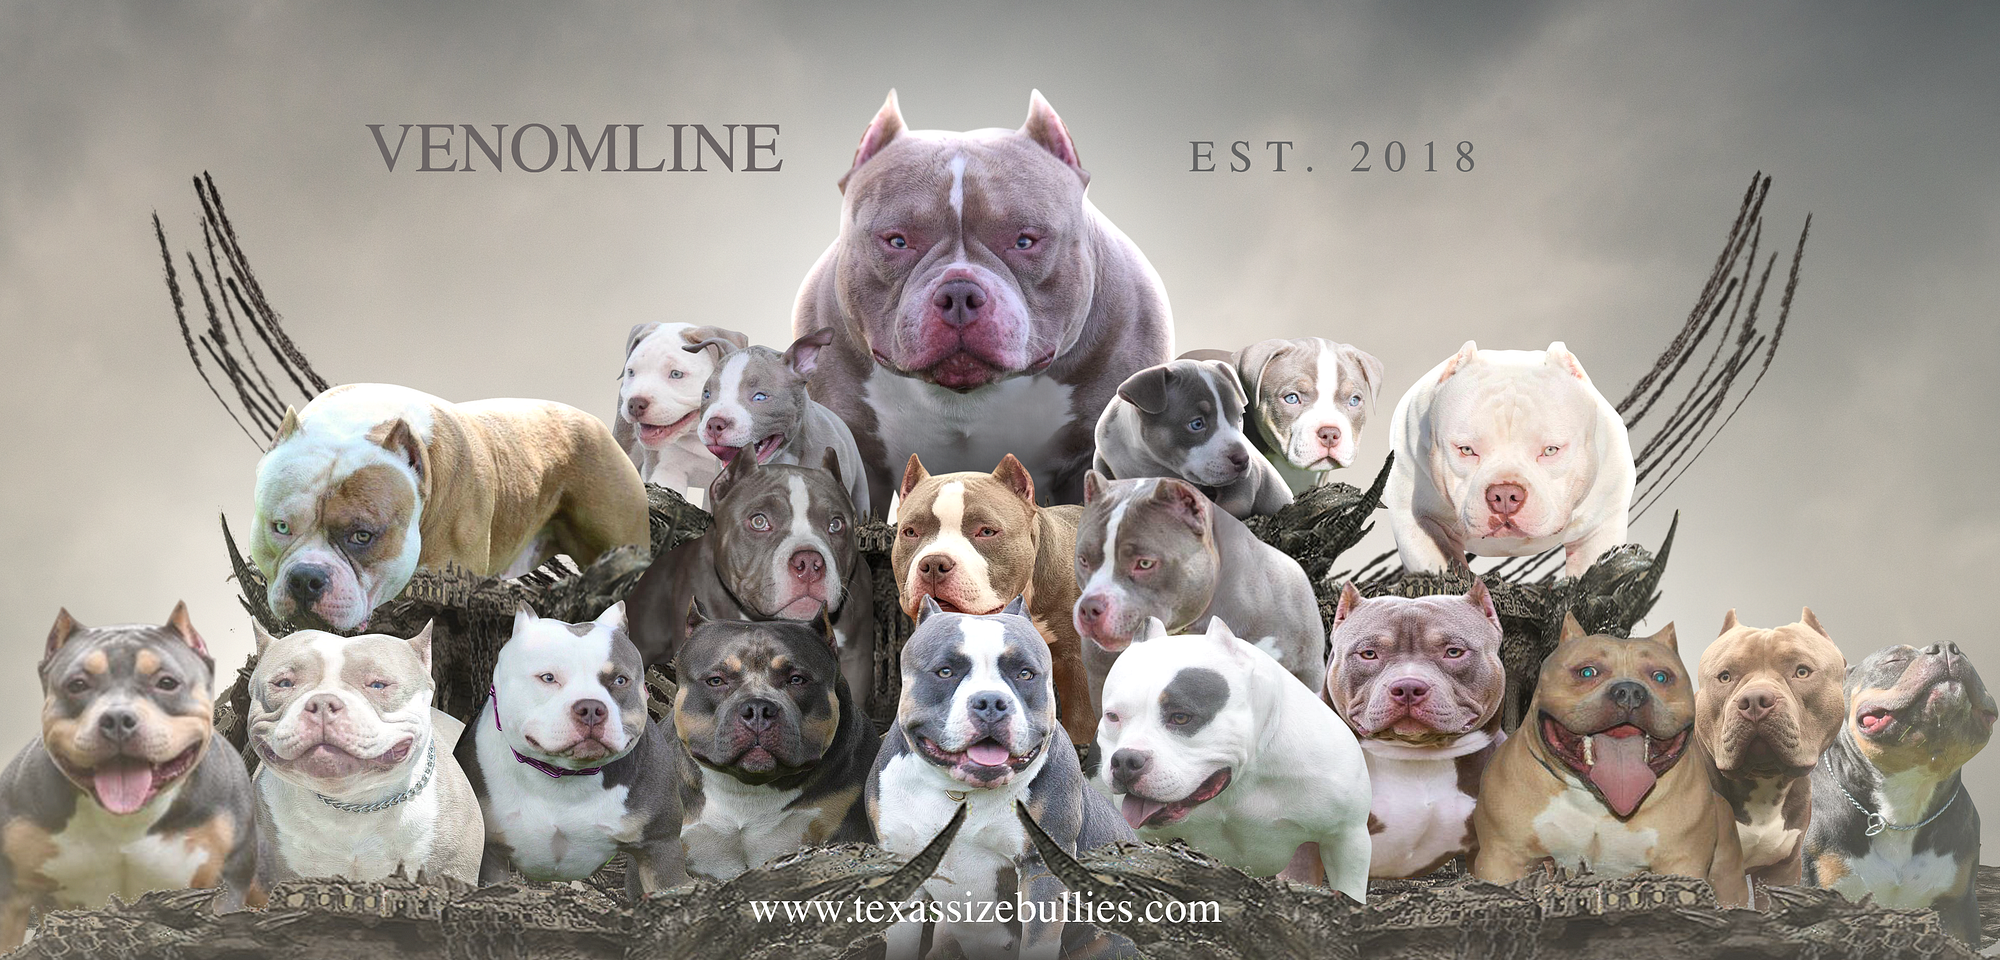 Legend Louis V Line's Venom is Producing Some Of The Best American Bullies, by BULLY KING Magazine